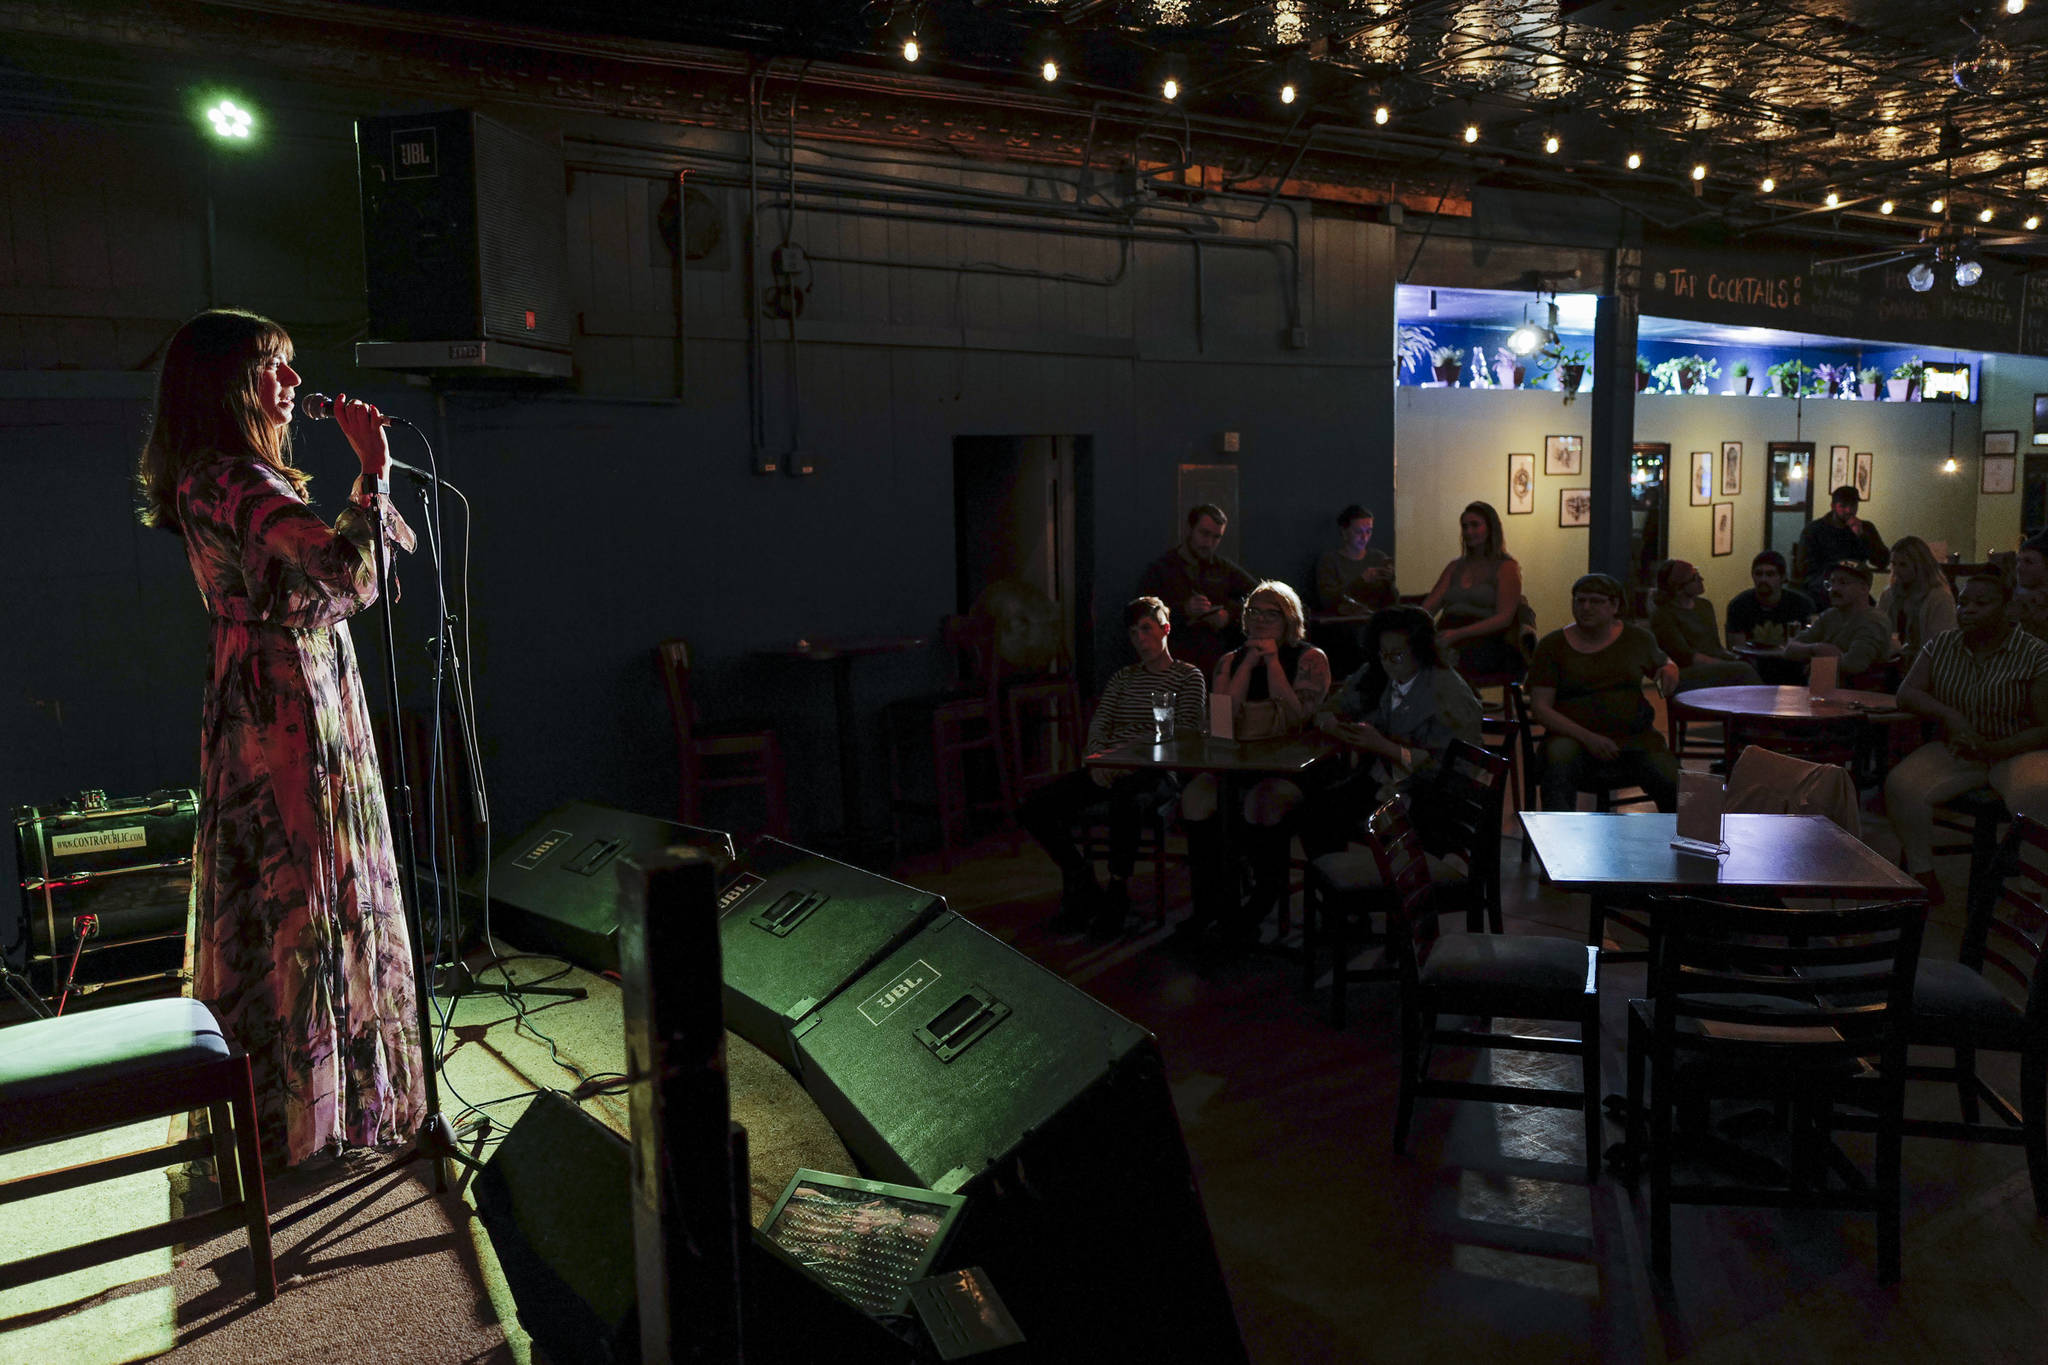 Dana Herndon performs with a story of Cleopatra during the GRLZ open mic night at the The Rendezvous Bar on Wednesday, Aug. 14, 2019. (Michael Penn | Juneau Empire)